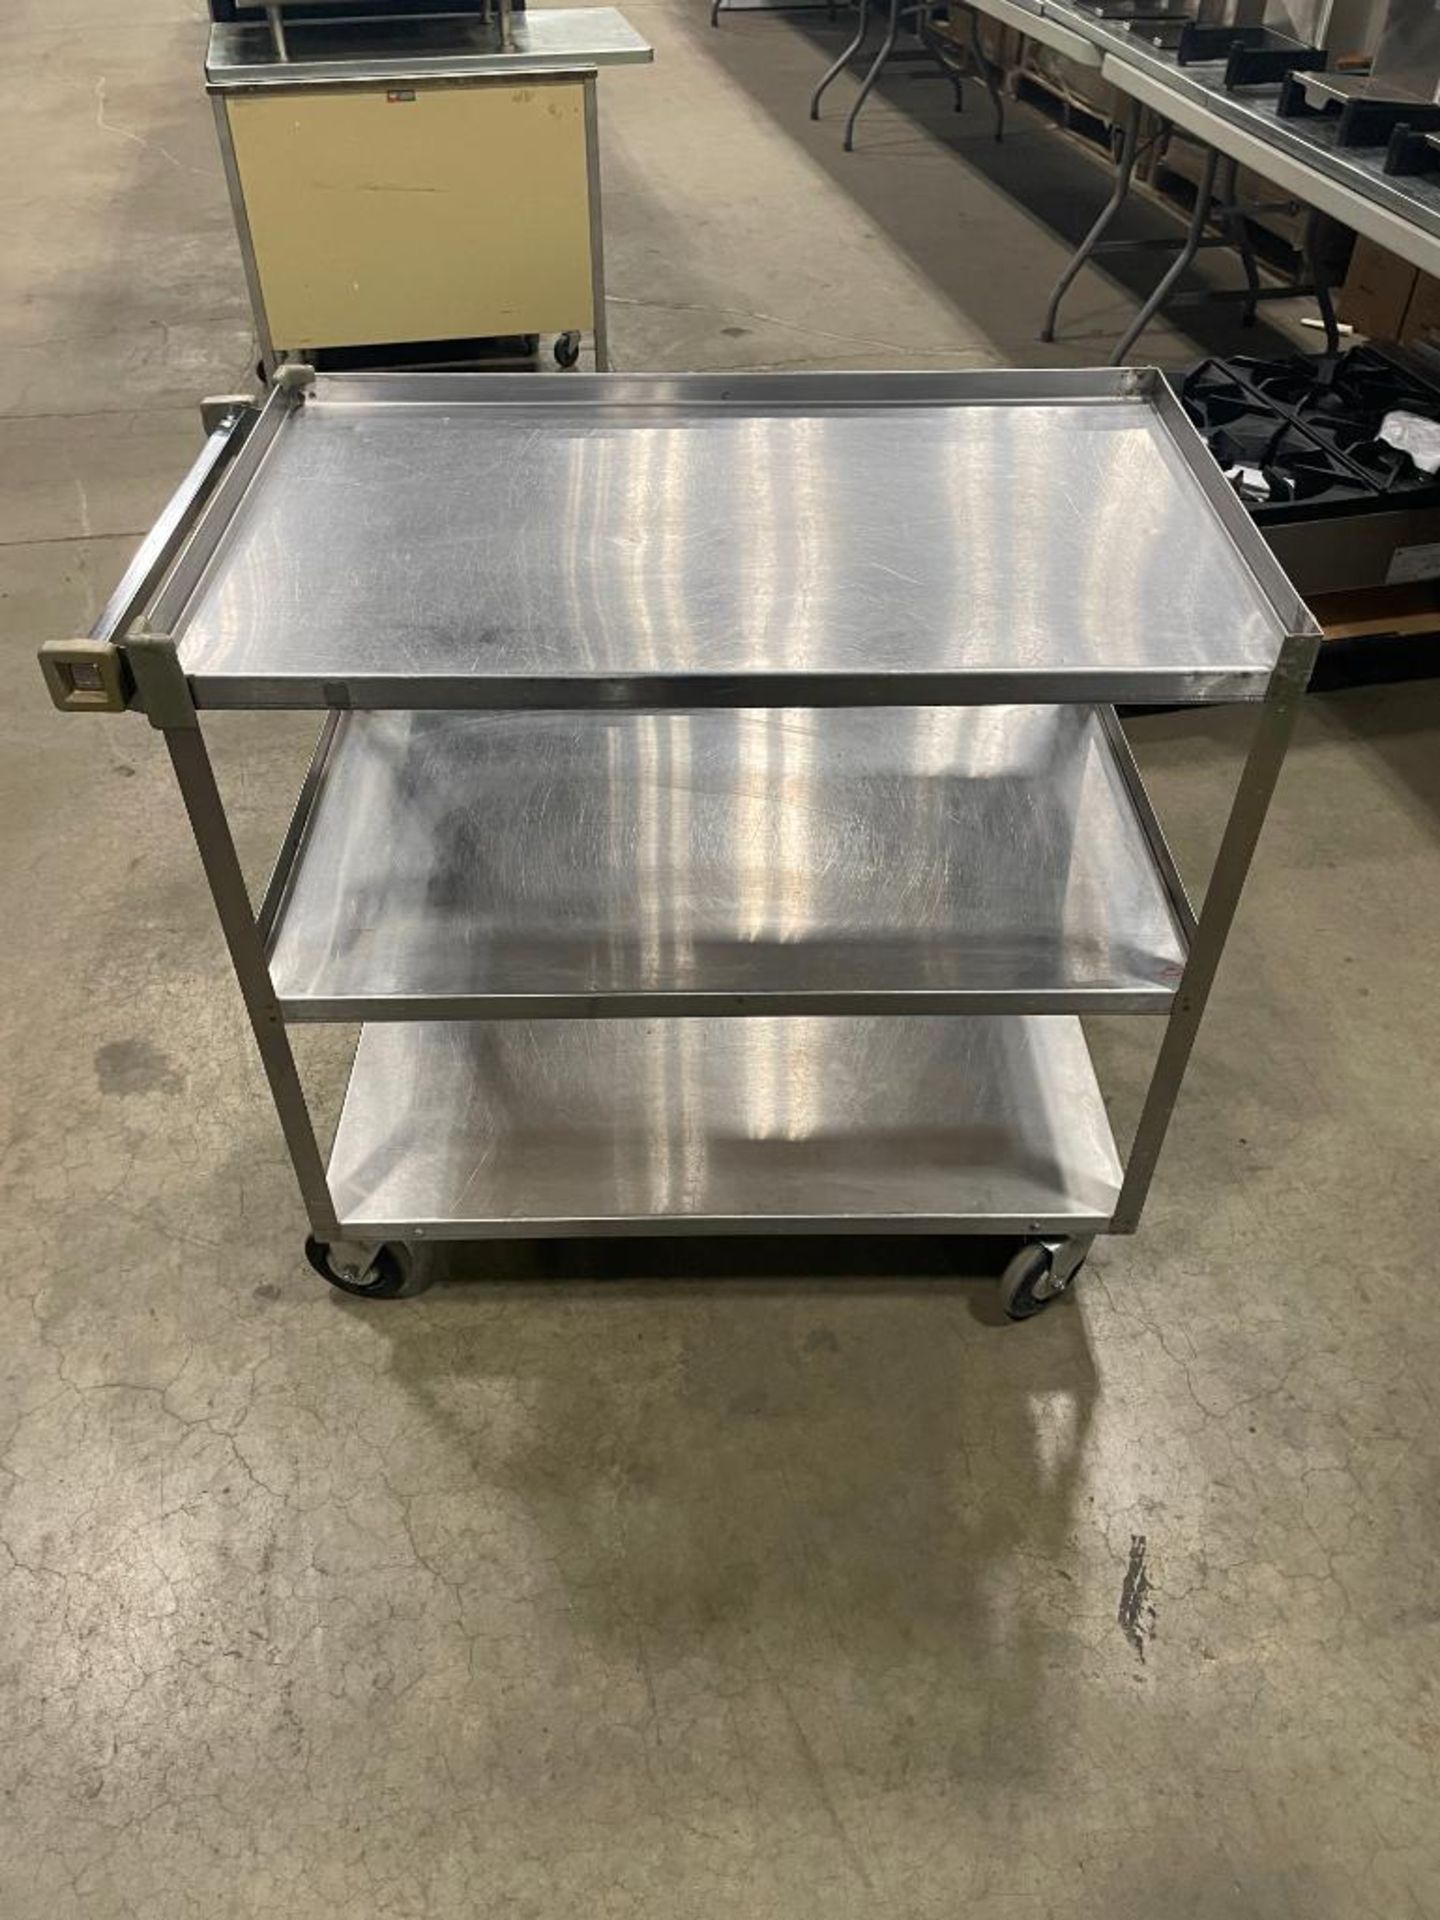 BLOOMFIELD 3-TIER STAINLESS STEEL BUSSING CART - Image 5 of 6